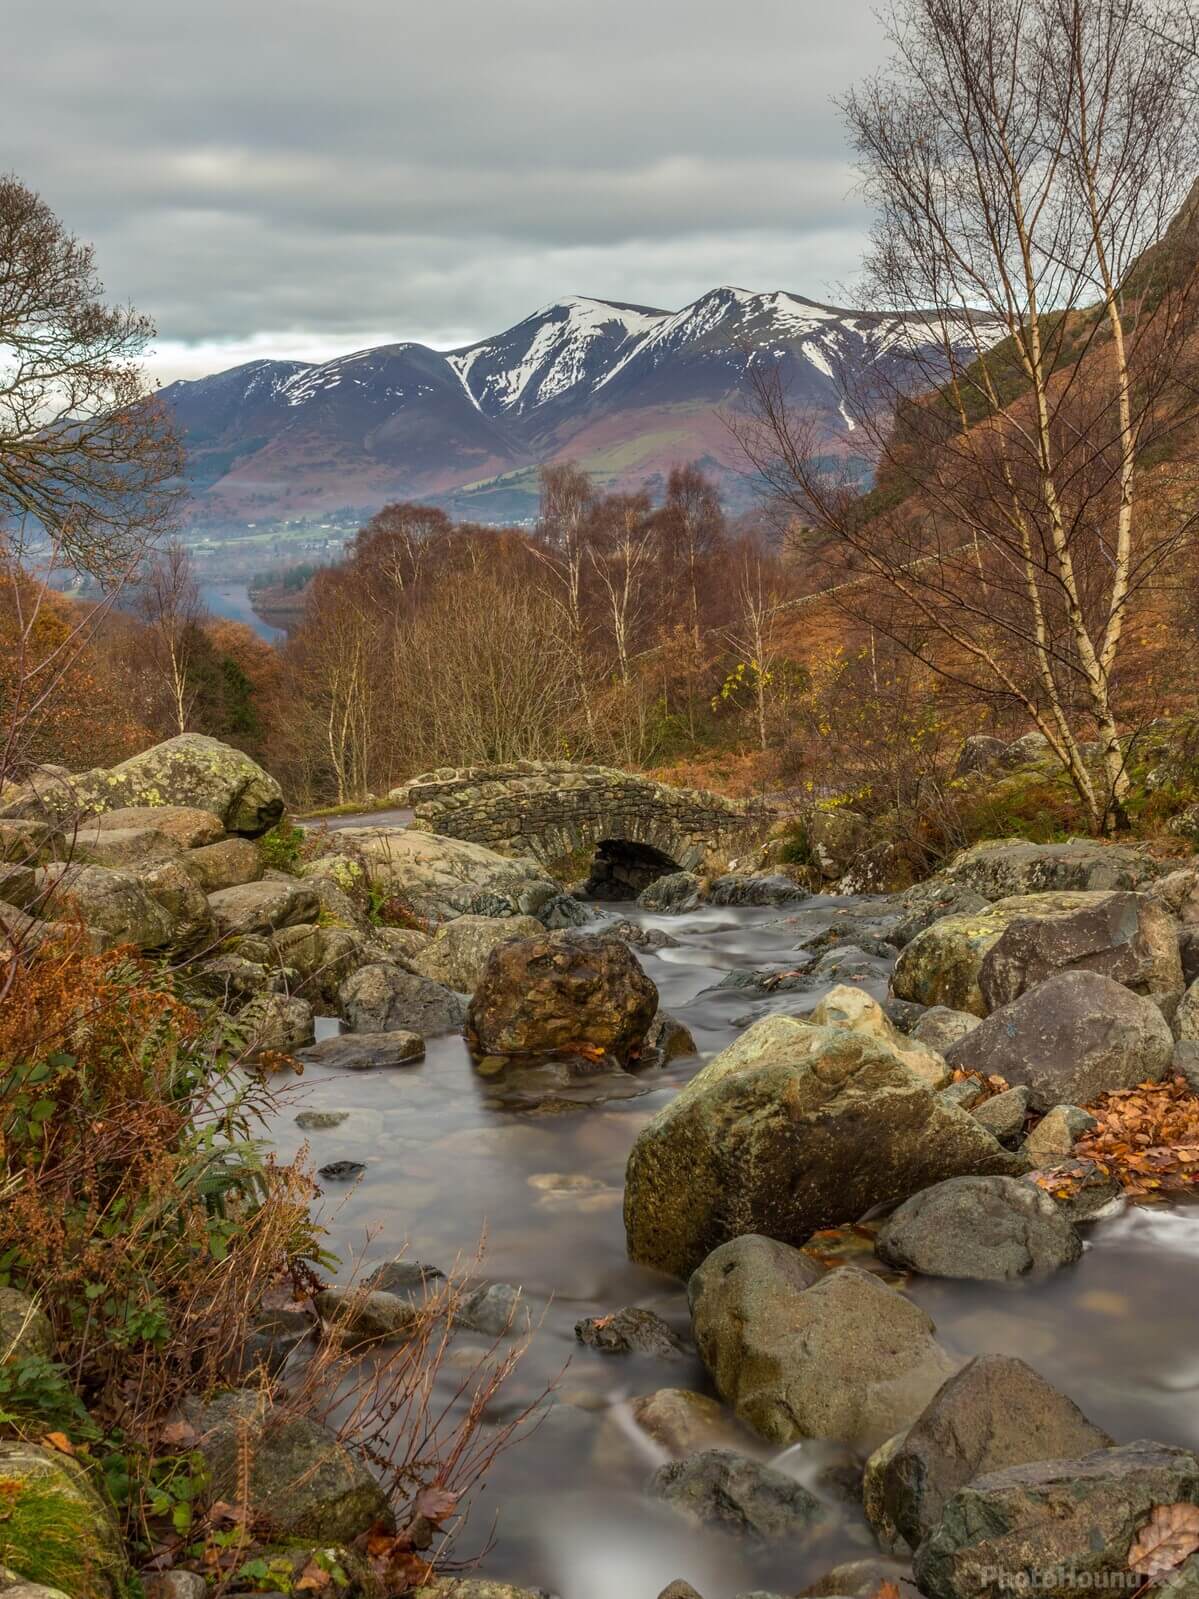 Image of Ashness Bridge & Surprise View, Lake District by Andy Killingbeck